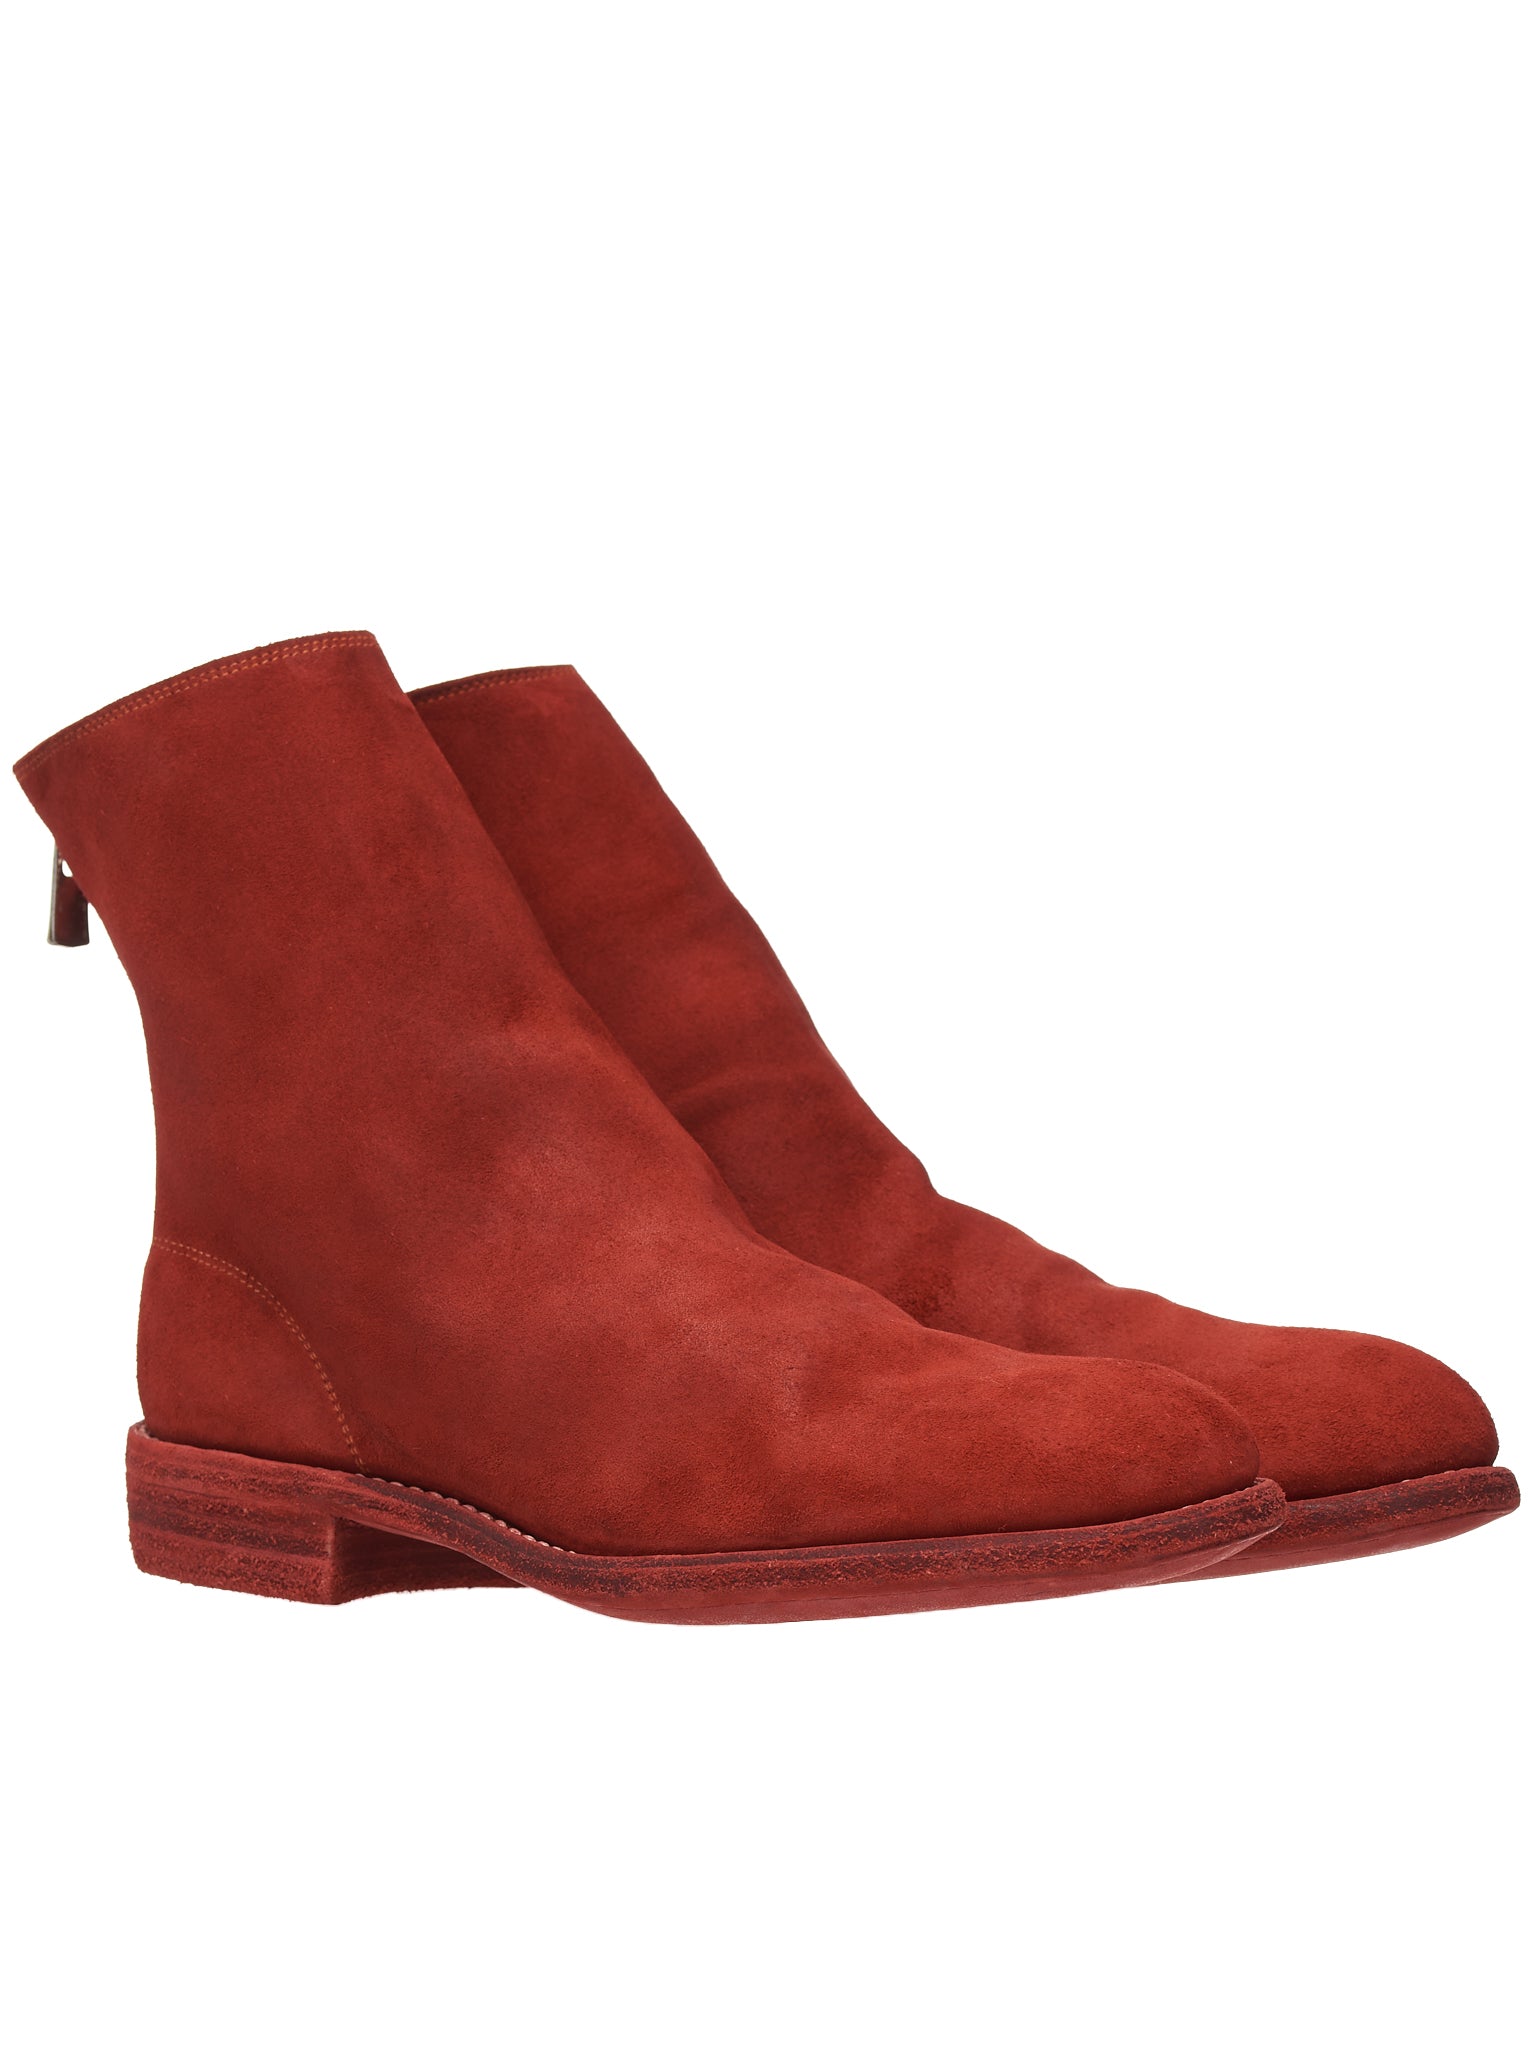 986 Horse Leather Zip Boots (986-HORSE-REVERSE-1006T-RED)